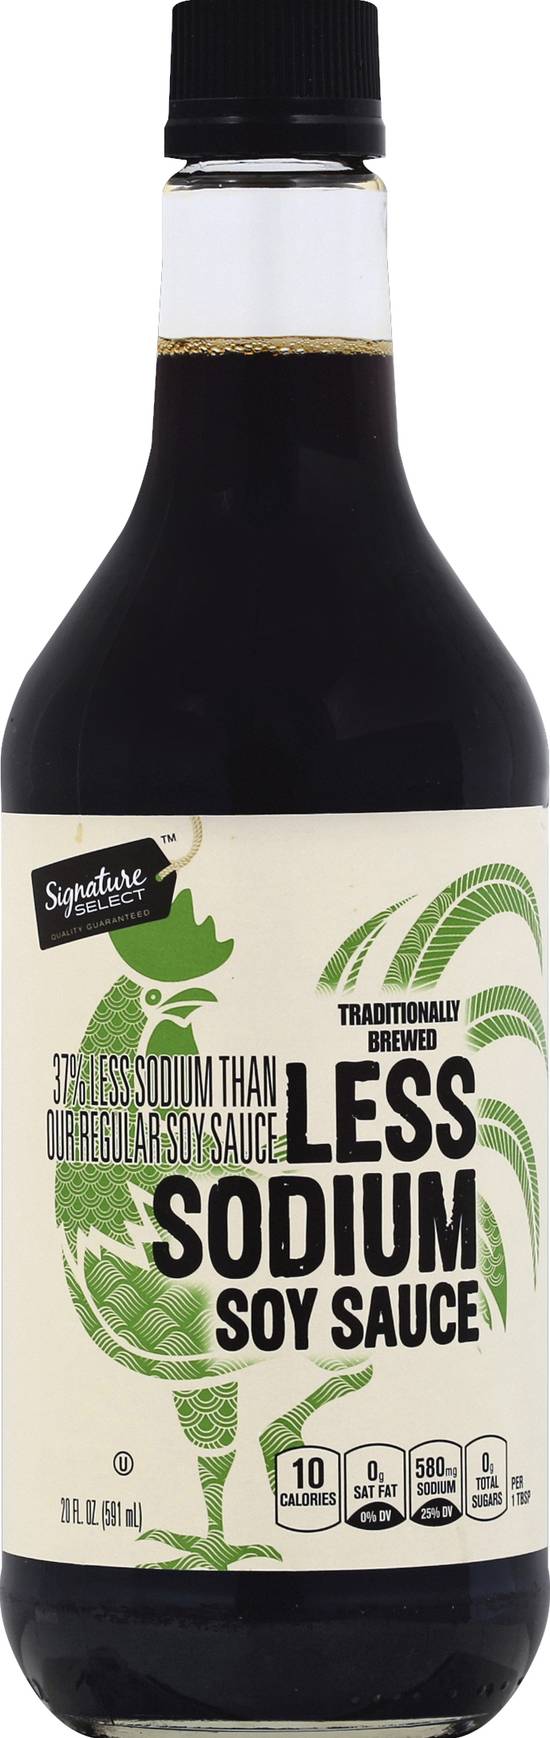 Signature Select Less Sodium Traditionally Brewed Soy Sauce